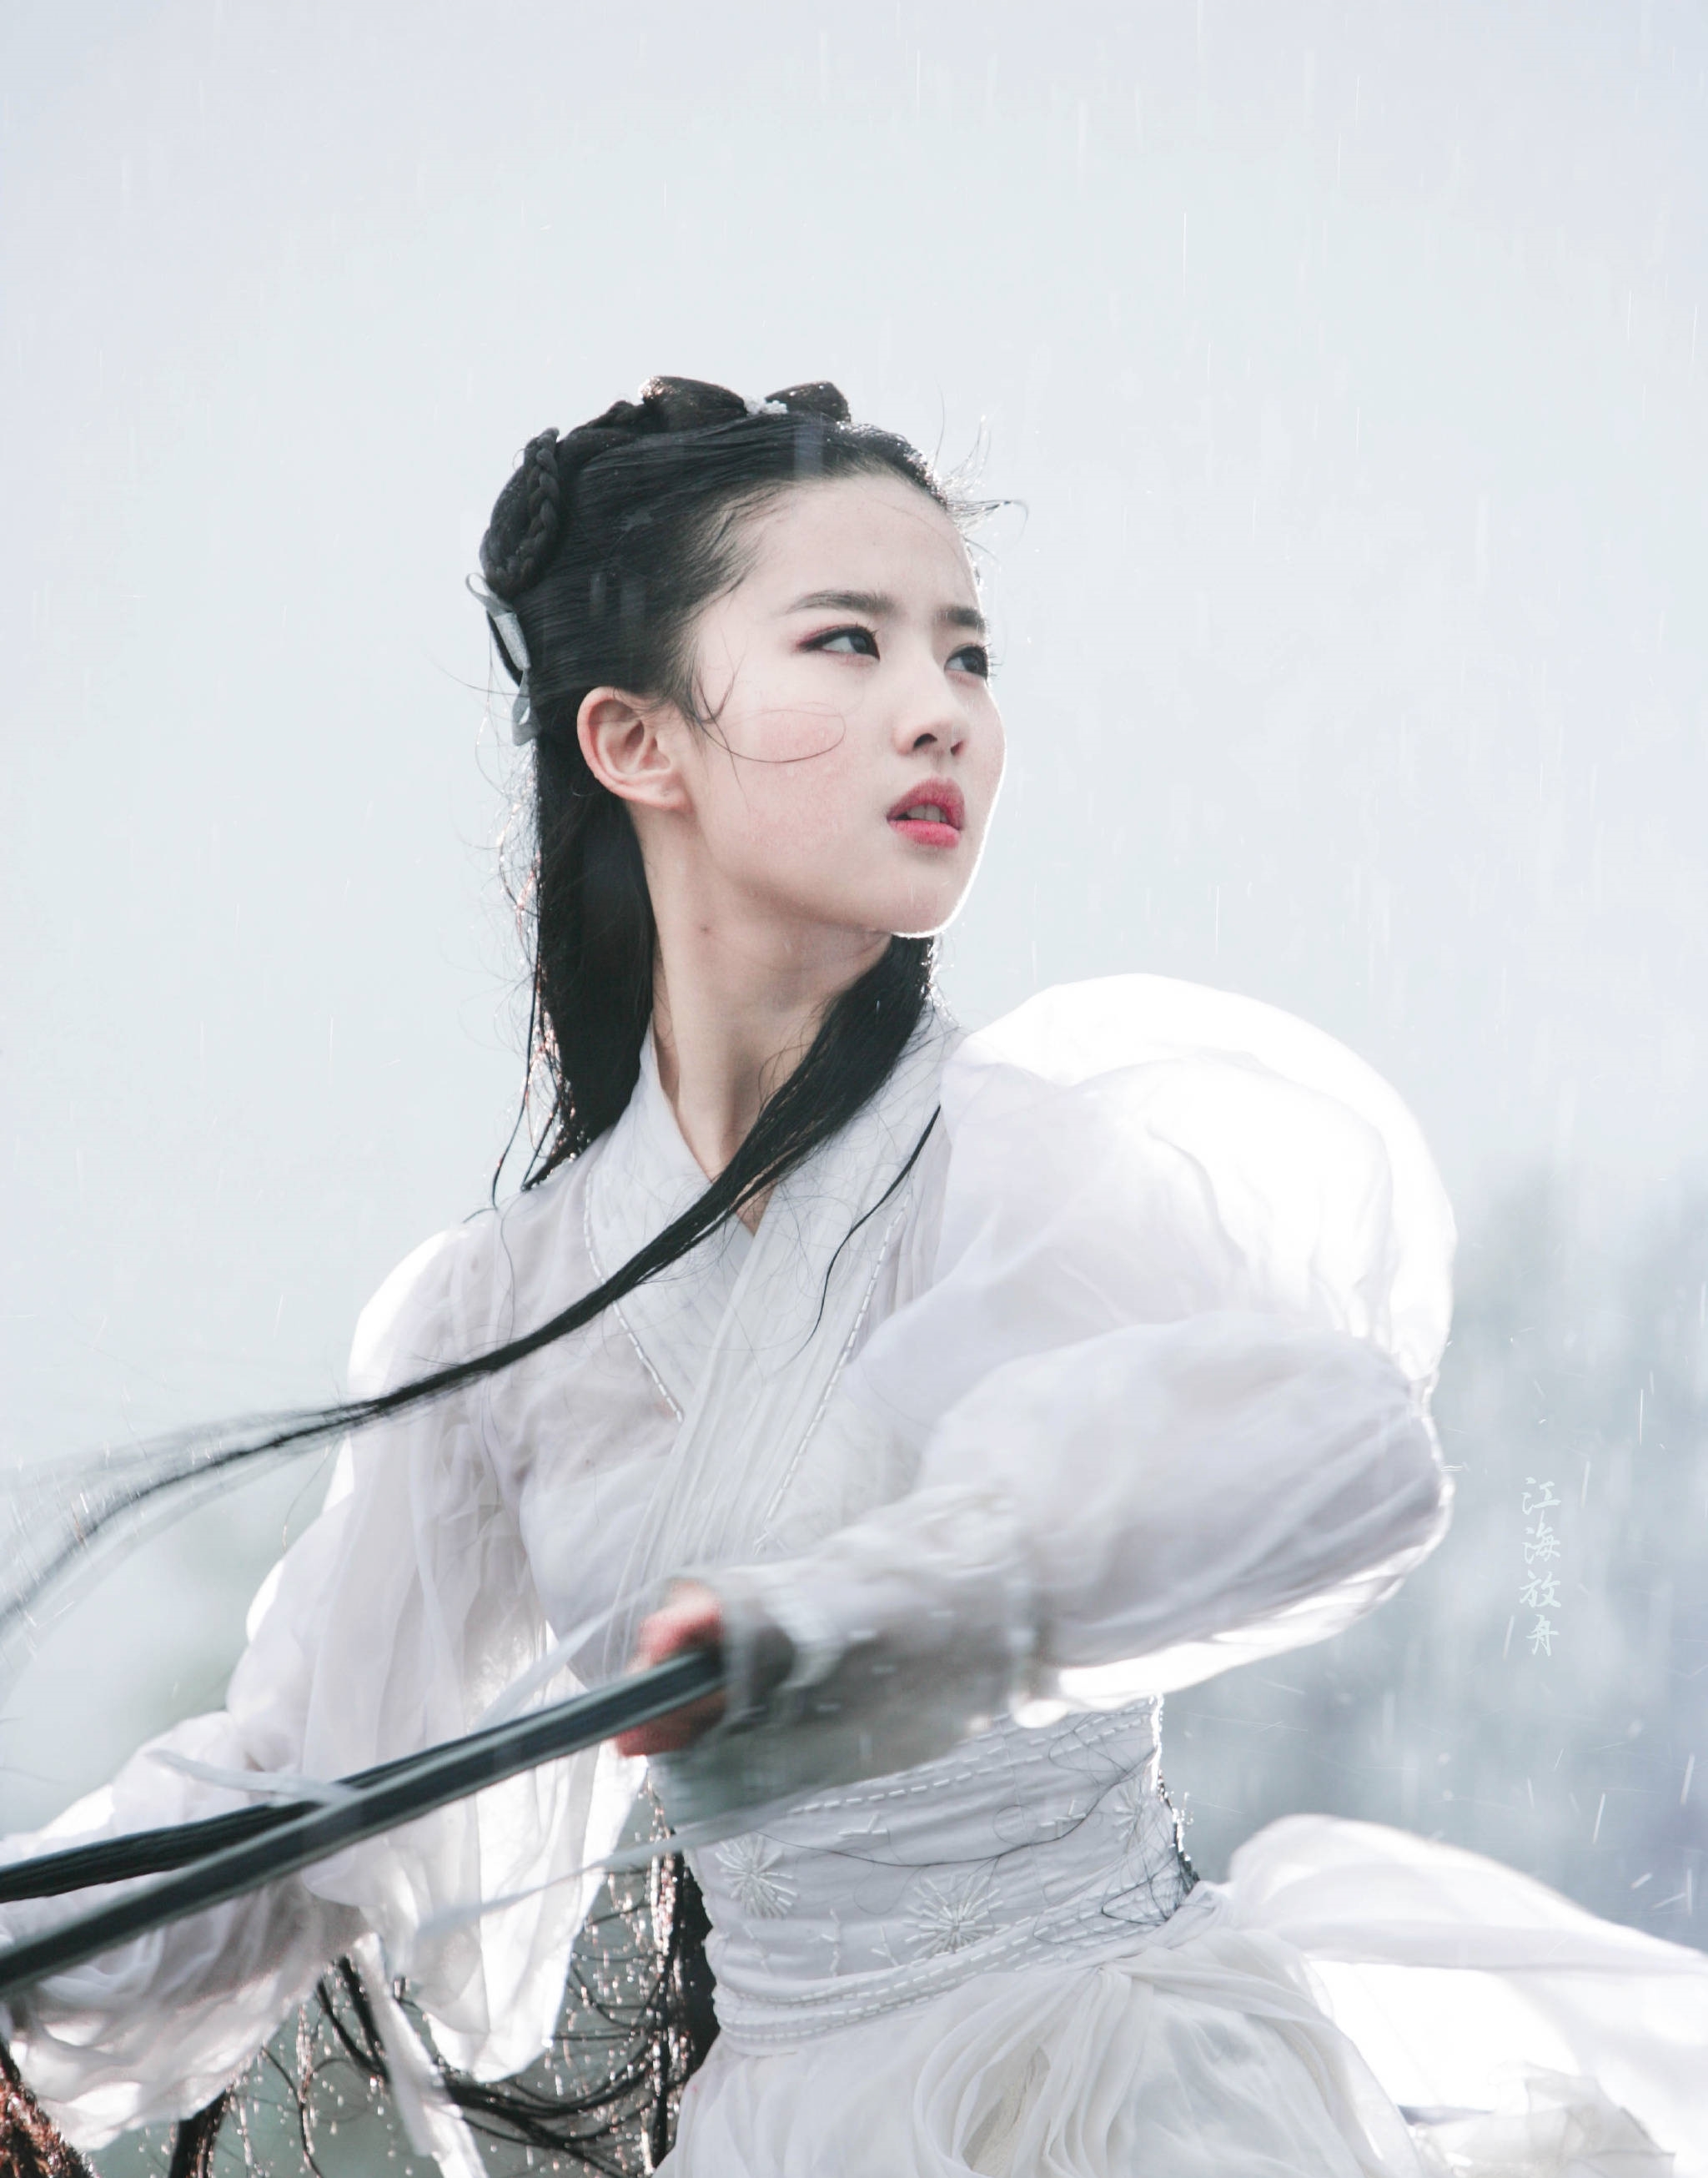 " dream China is recorded " the road appears exposure, jing of ancient costume of Liu Yifei old dawn is colourful, doubt is like film men and women advocate encounter play